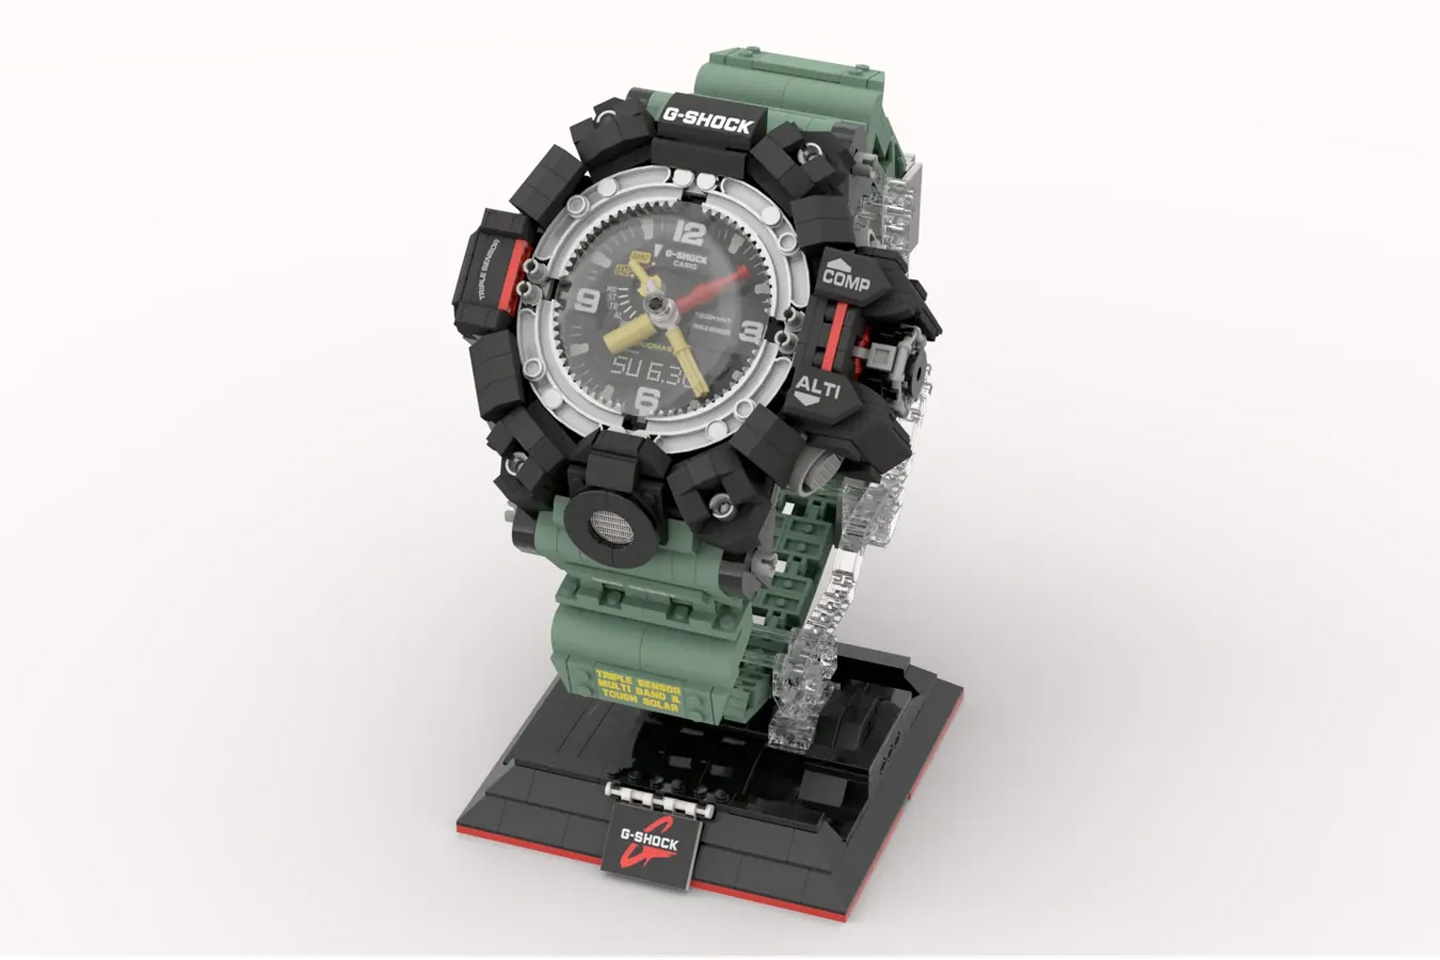 #This LEGO G-Shock Mudmaster looks just about as realistic as the original